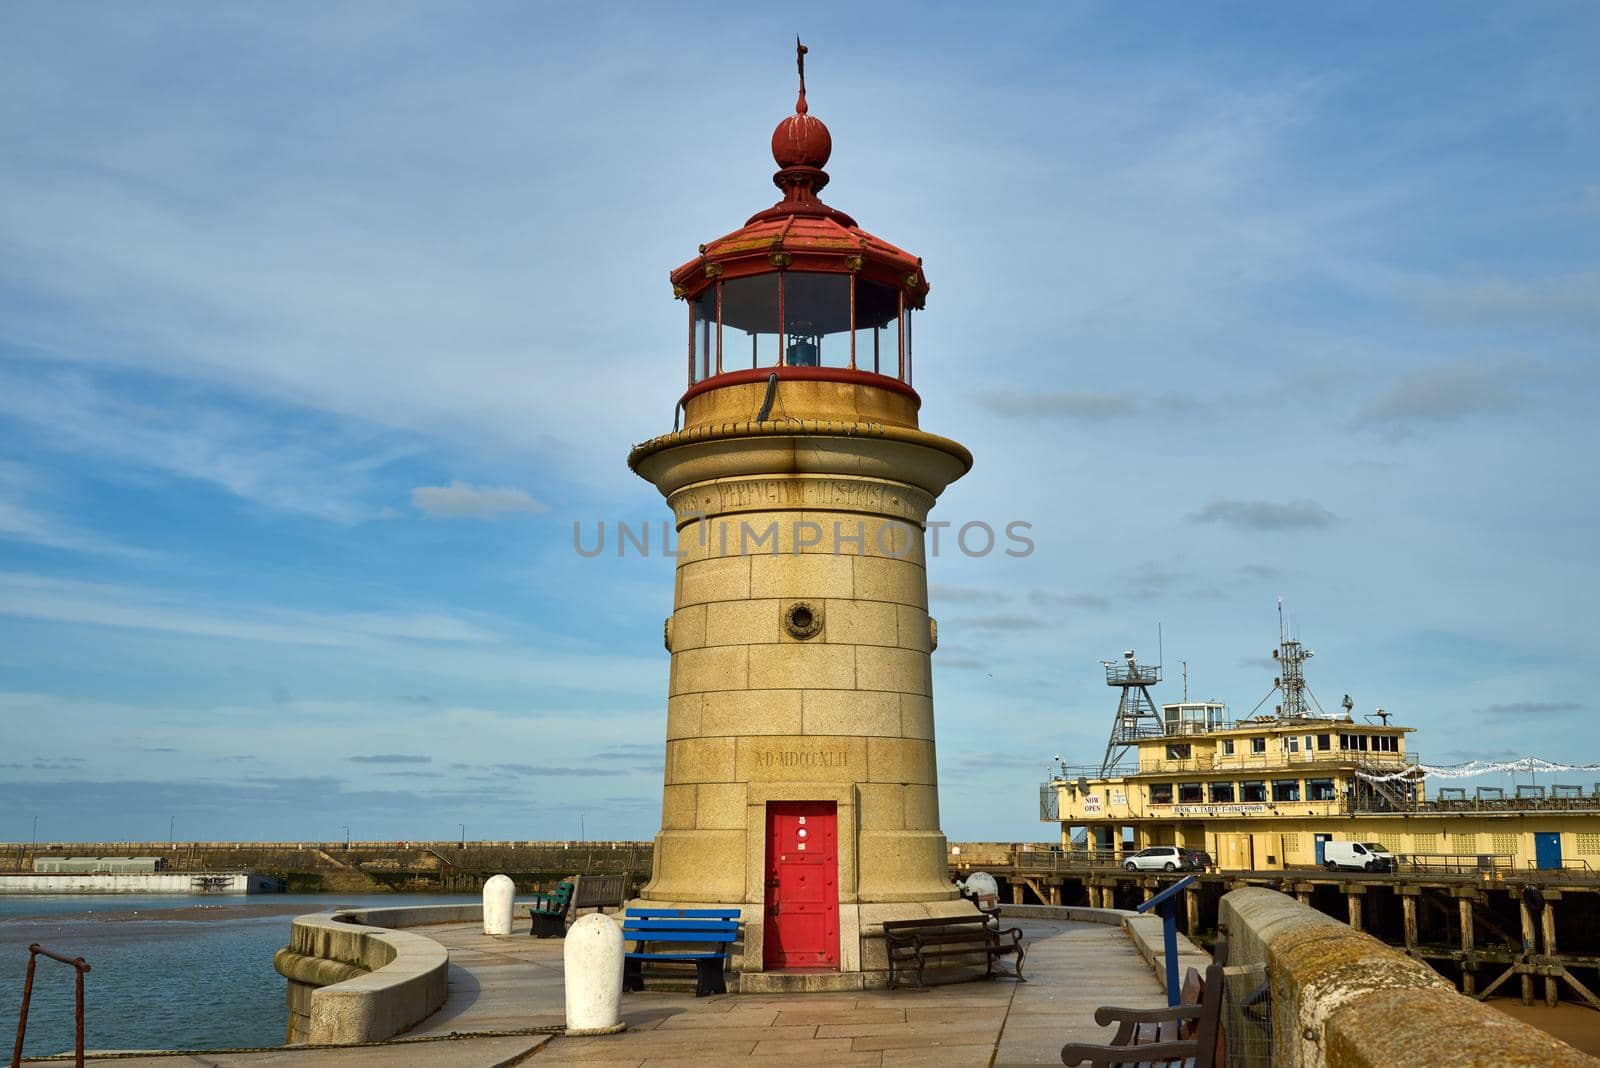 Ramsgate, United Kingdom - April 26, 2021: Ramsgate Lighthouse on the West Pier of the Royal Harbour in the county of Kent, England. by ChrisWestPhoto